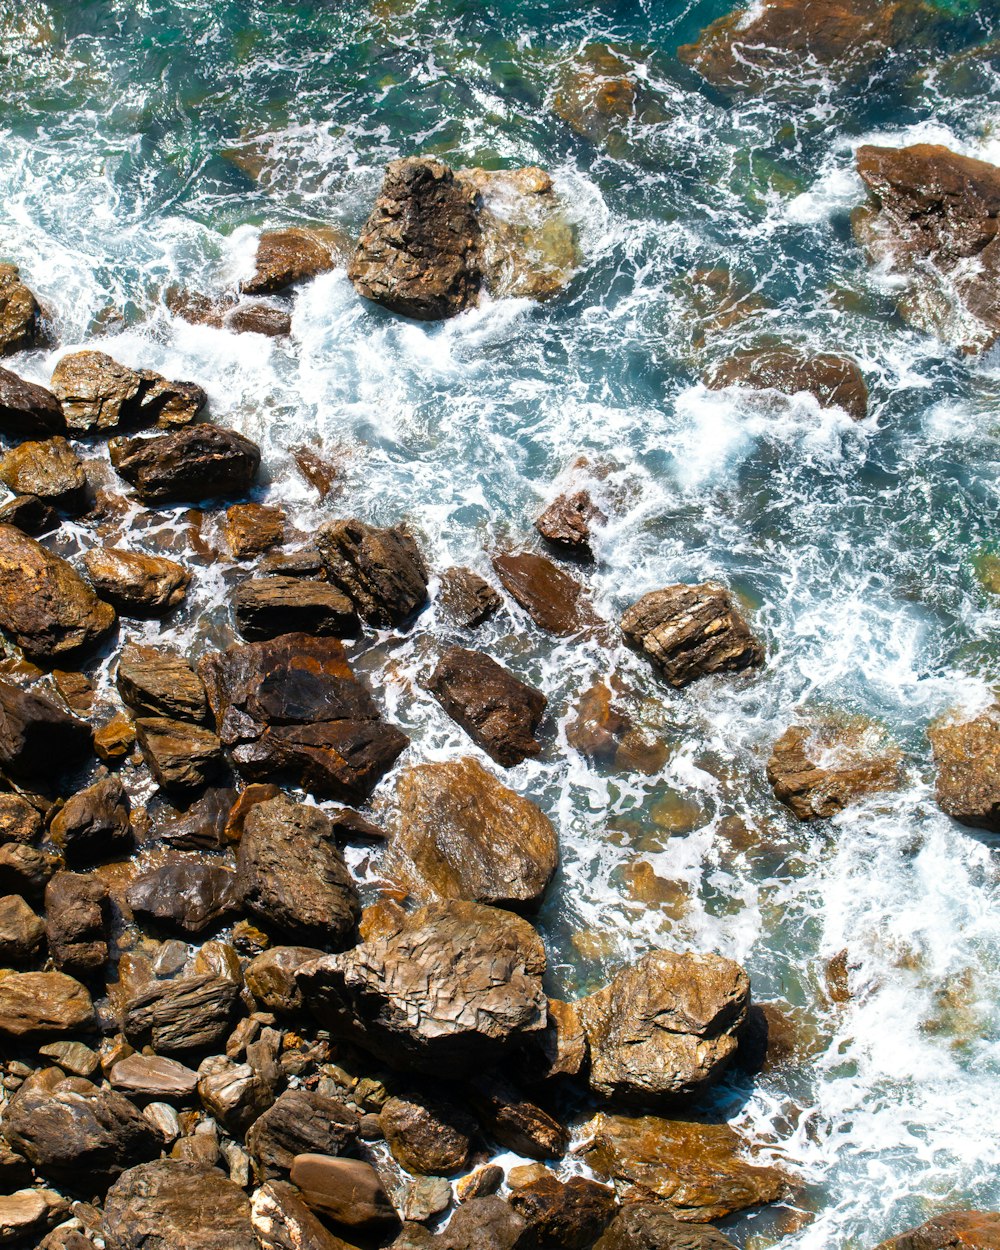 a view of a rocky beach with a bunch of rocks in the water